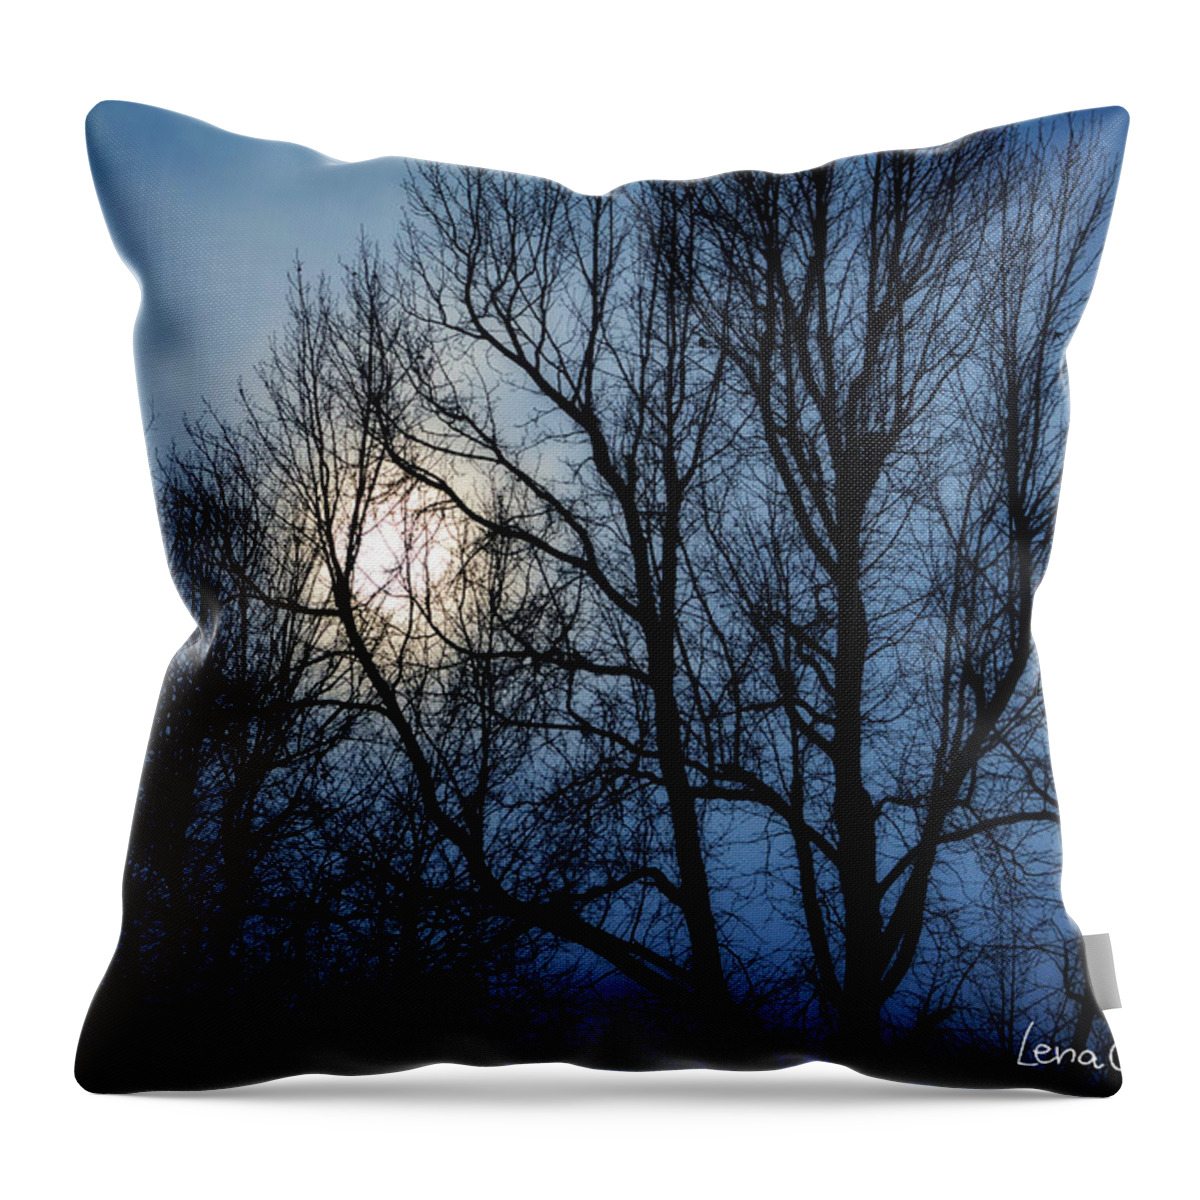 Landscape Throw Pillow featuring the photograph In The Midnight Hour by Lena Wilhite